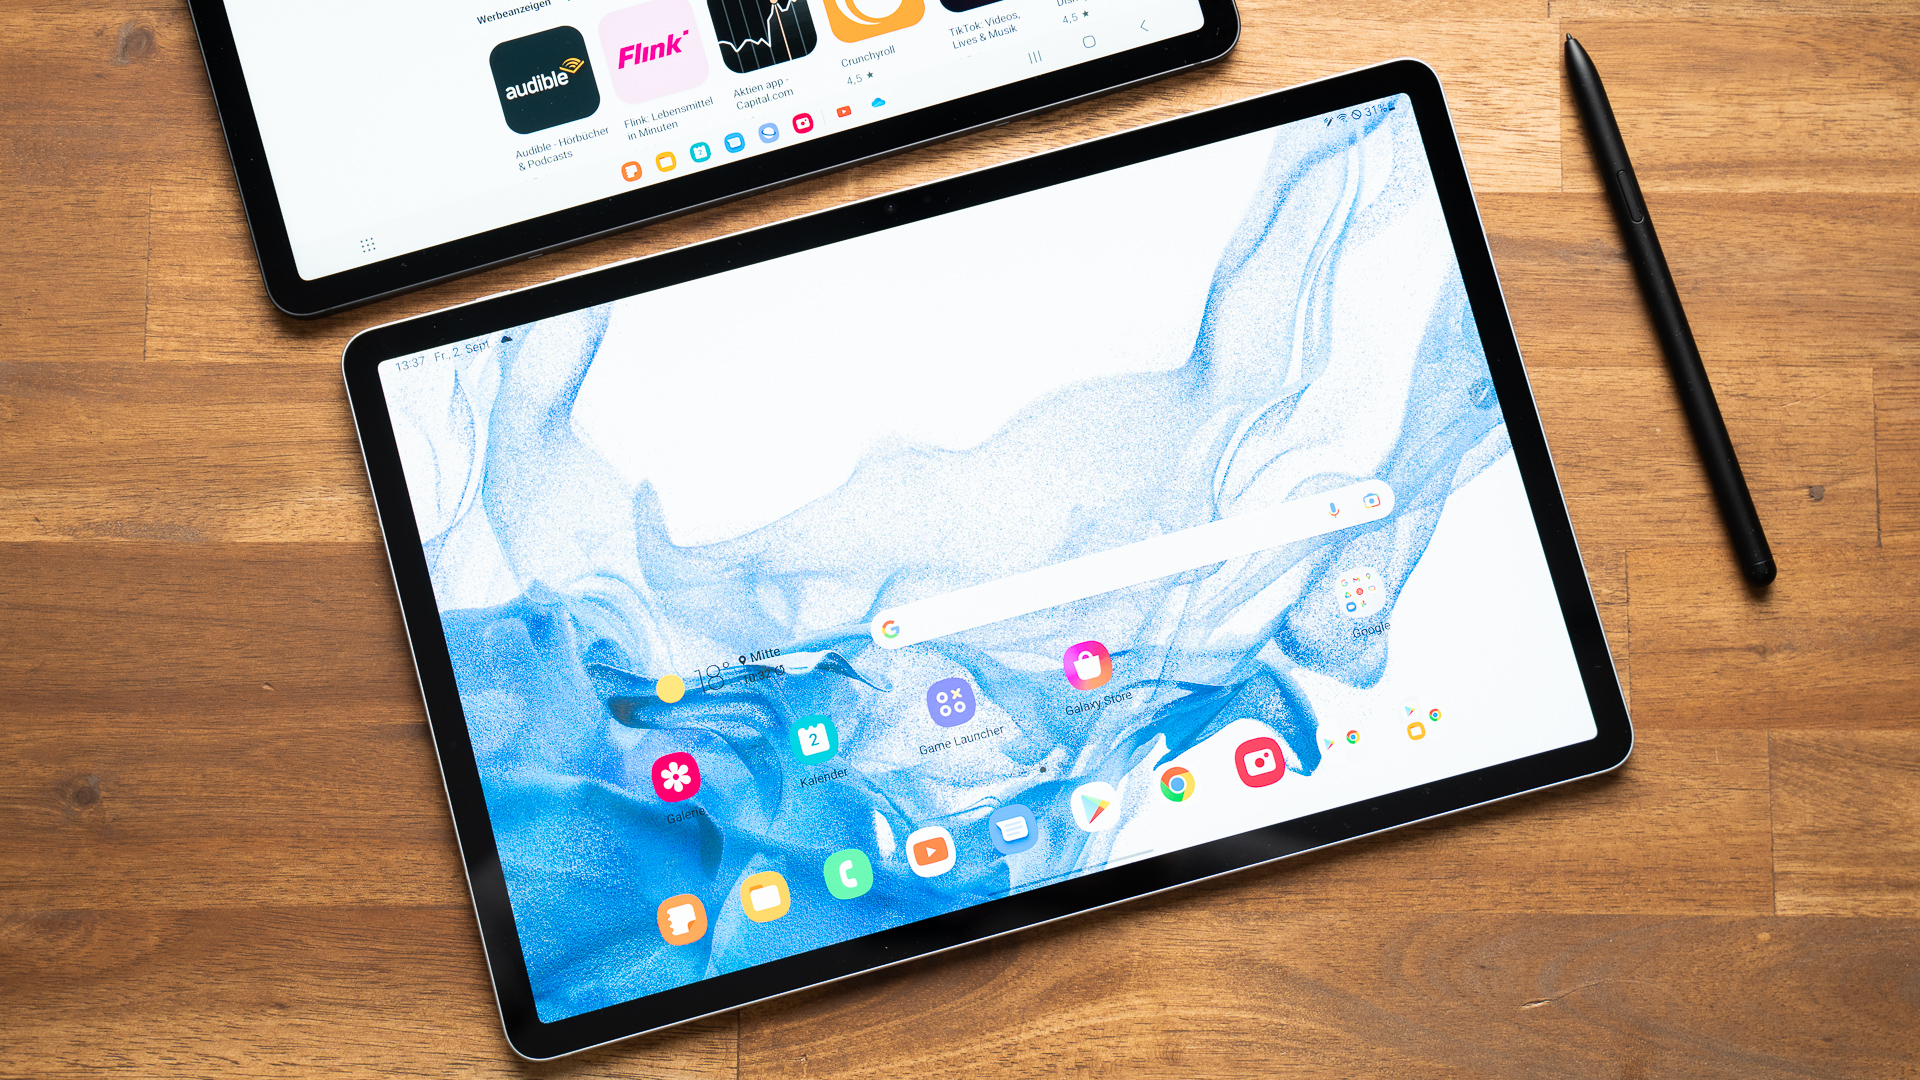 Samsung Galaxy Tab S8 with Android 12L